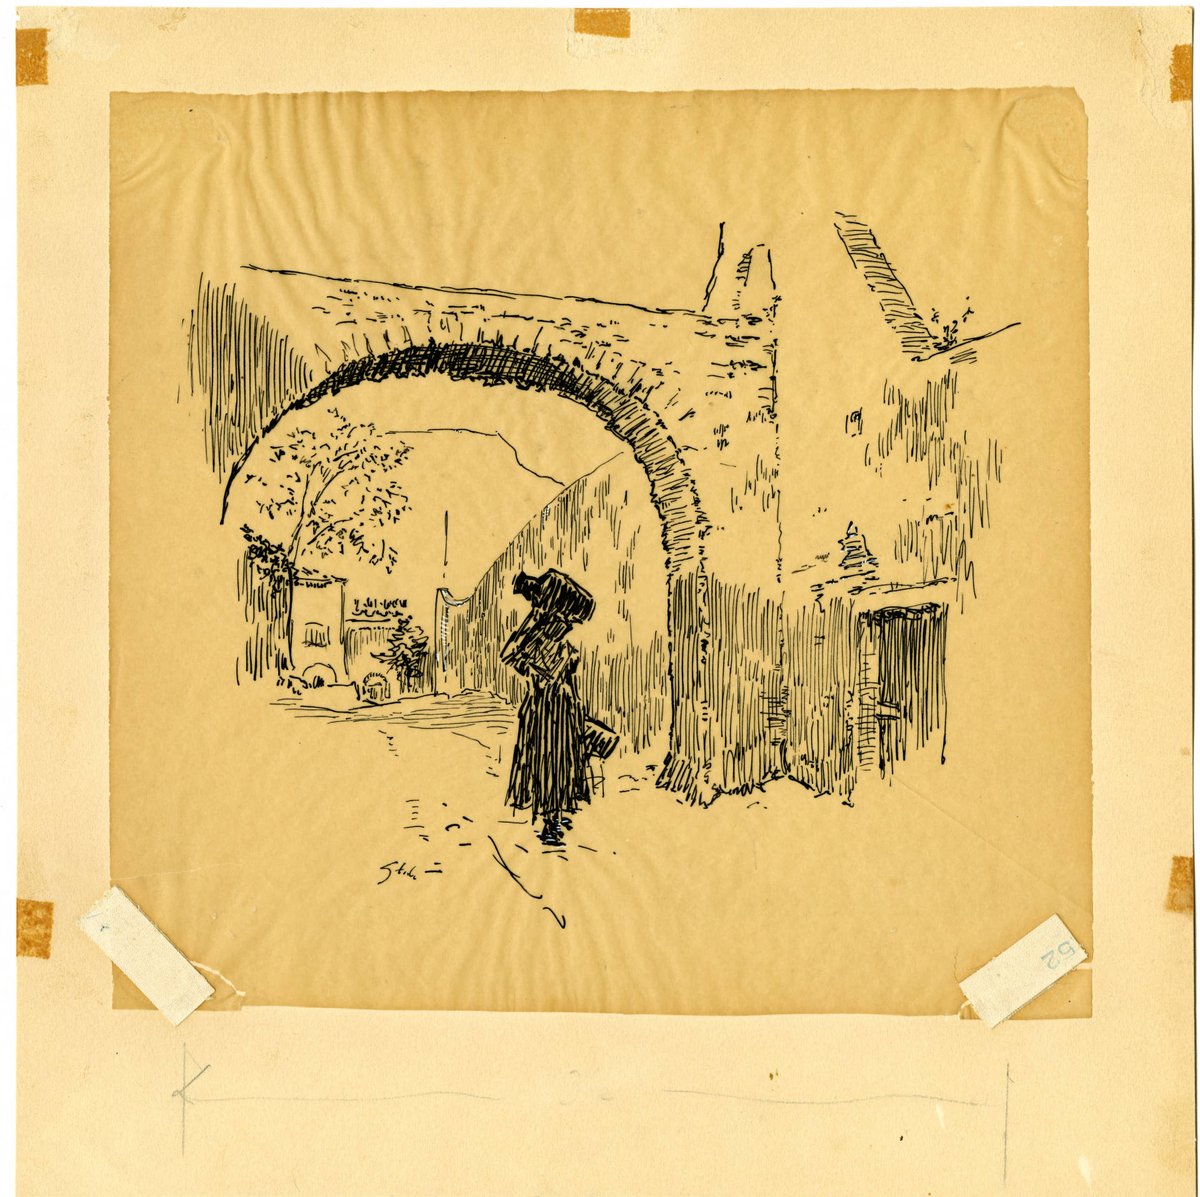 This unidentified scene by Steele from  @SherlockUMN  @umnlib features a lone figure carrying a burden down an unnamed street. The stark beauty of this image reminds us of two important lessons: we don't need to be alone; others can help with our loads.  http://purl.umn.edu/99679 